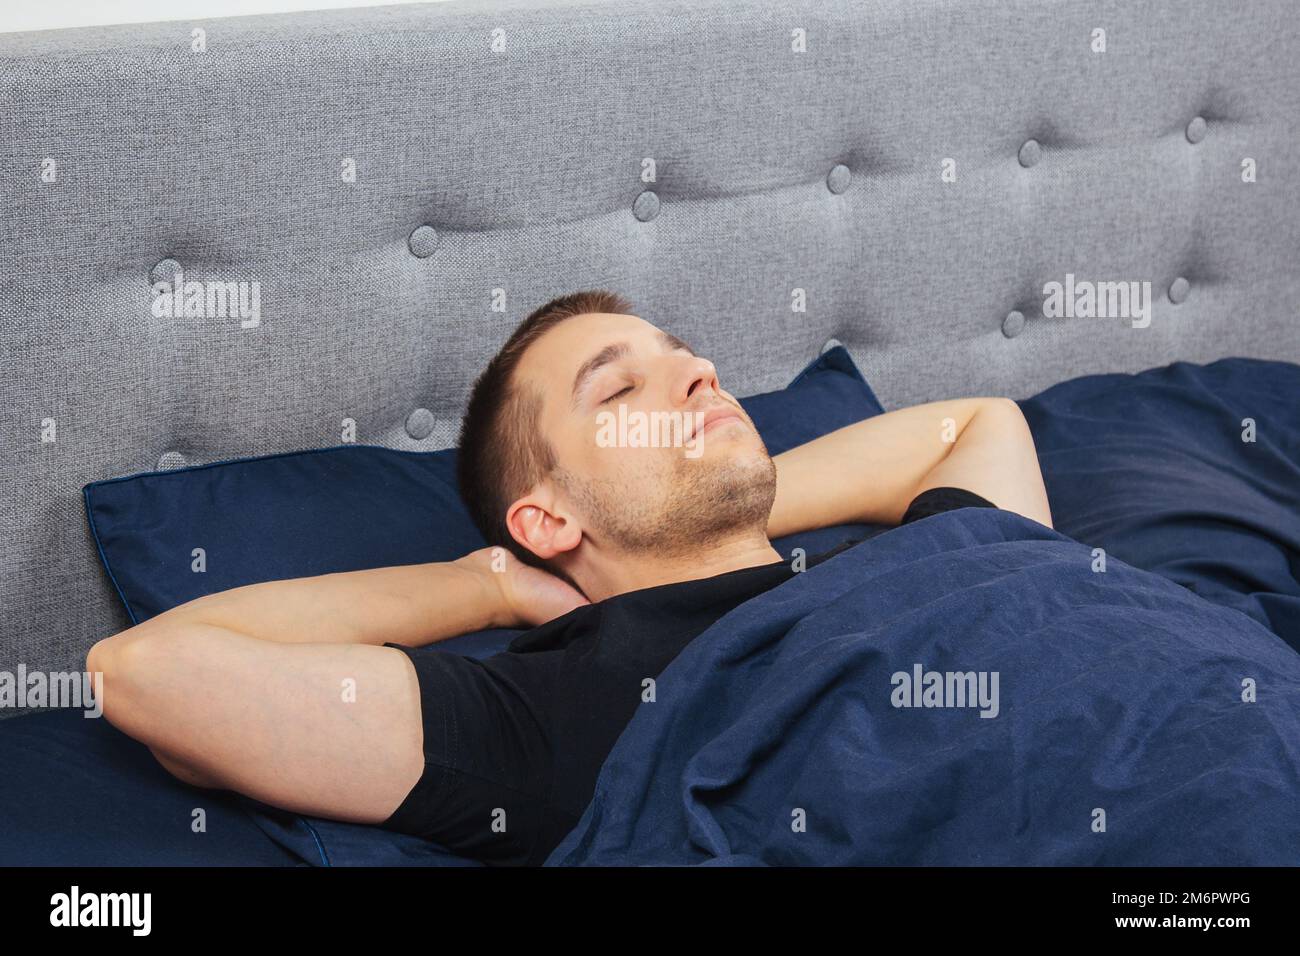 Top view of a handsome young man sleeping comfortably on the bed at night in his bedroom. Sleep in different positions. Bachelor bedroom. Deep sleep. Stock Photo